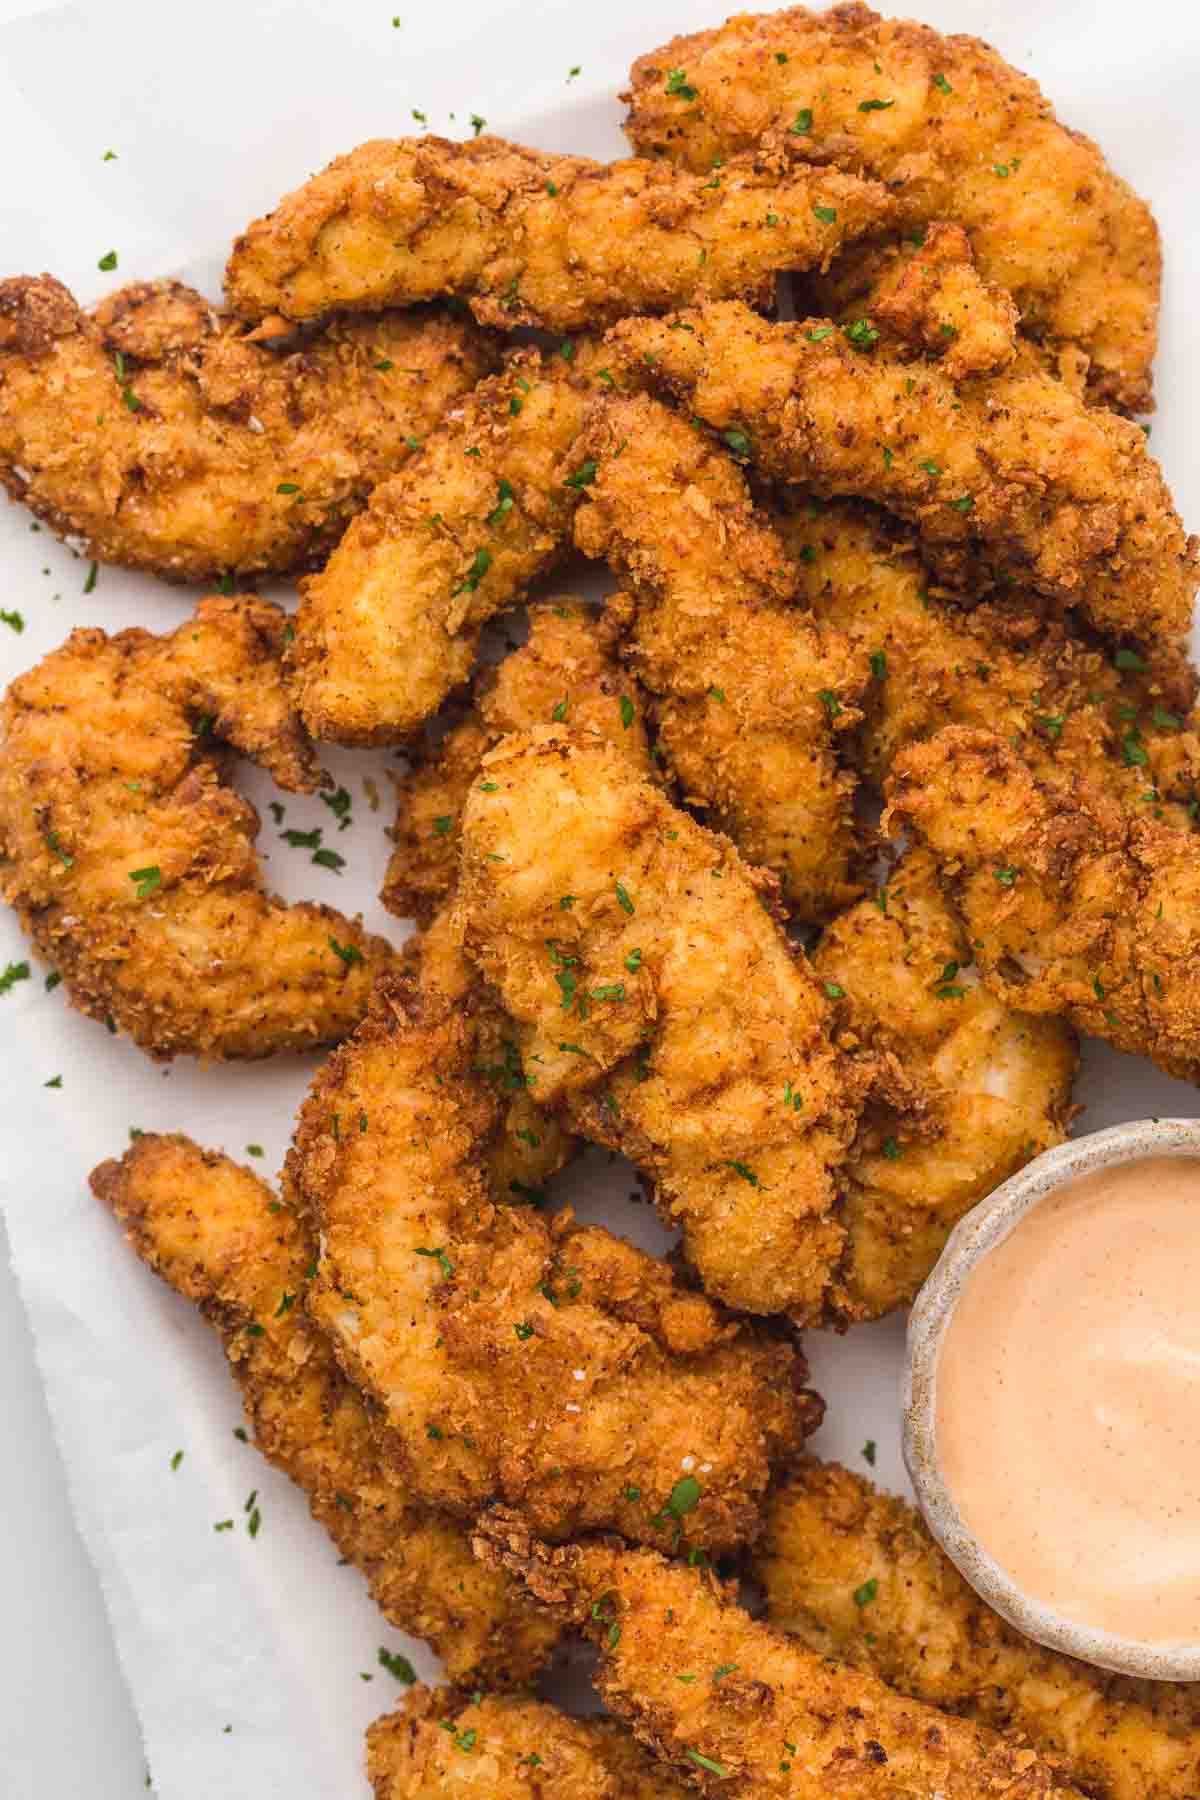 Overhead shot of golden brown chicken tenders and a dipping sauce.